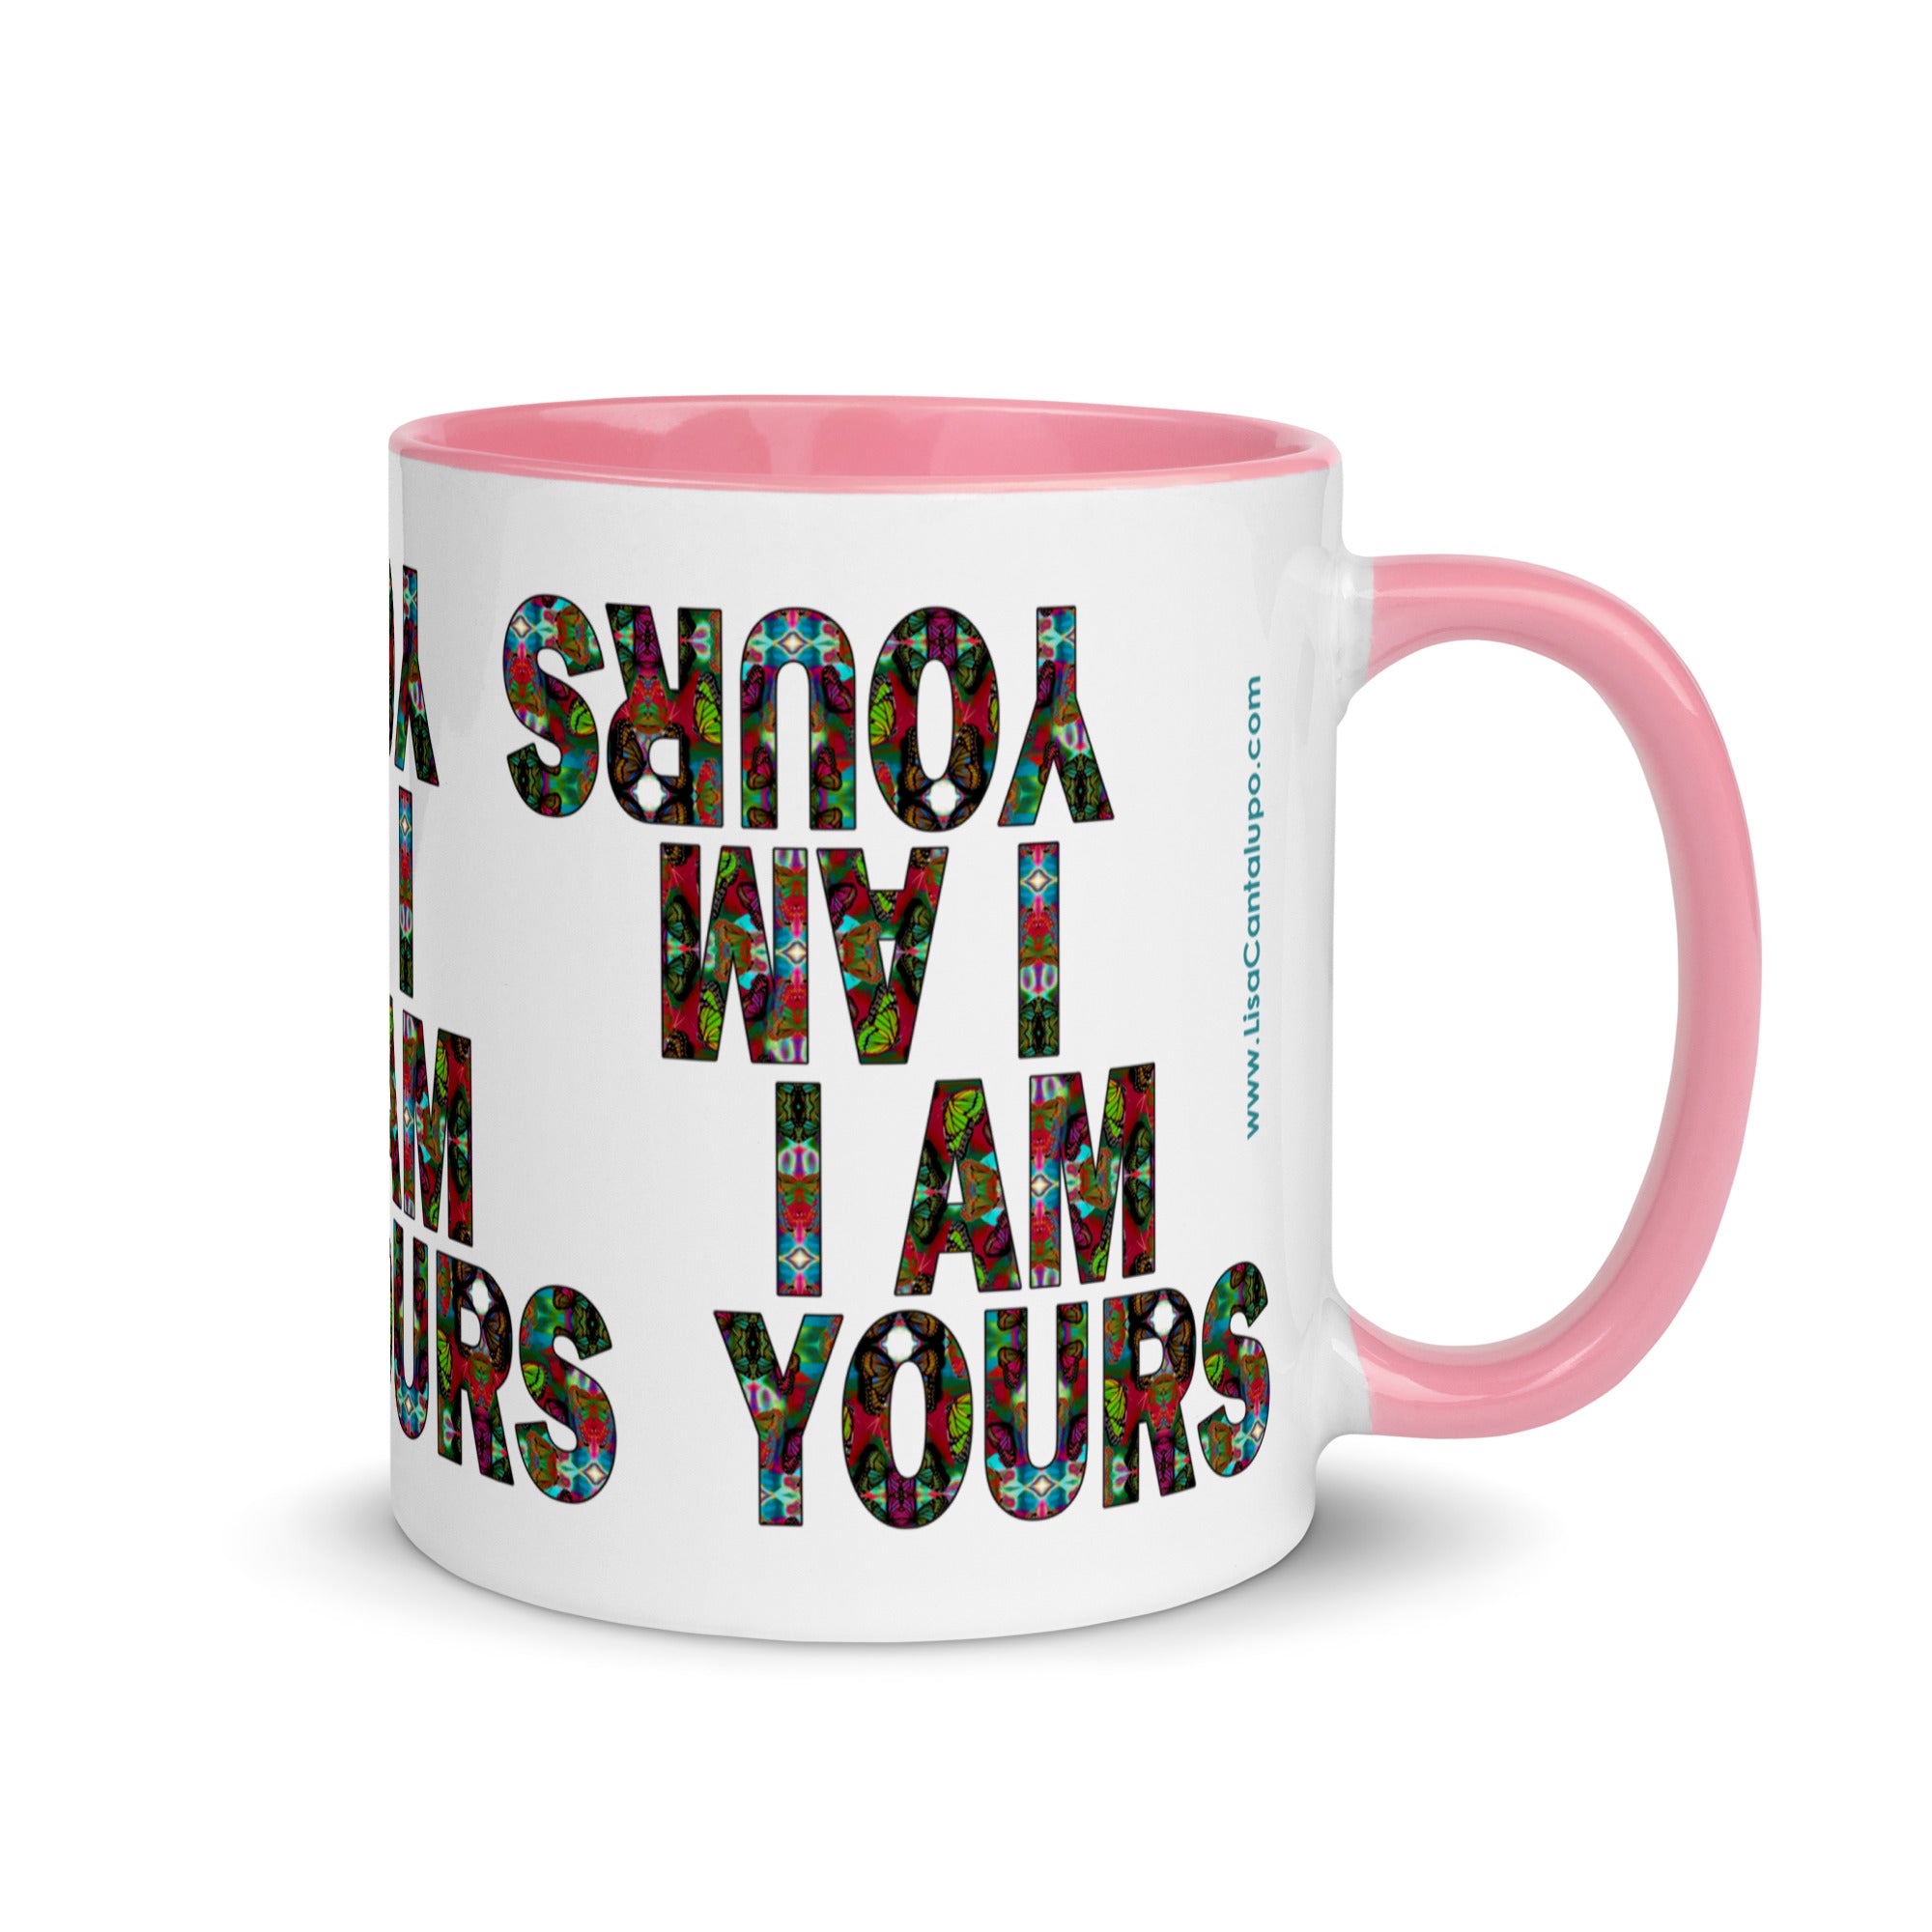 I am yours ~ LOVE ETERNAL Ceramic Mug; Colorful Butterflies Print, Red Handle Inside & Trim, Valentine's Day Gift